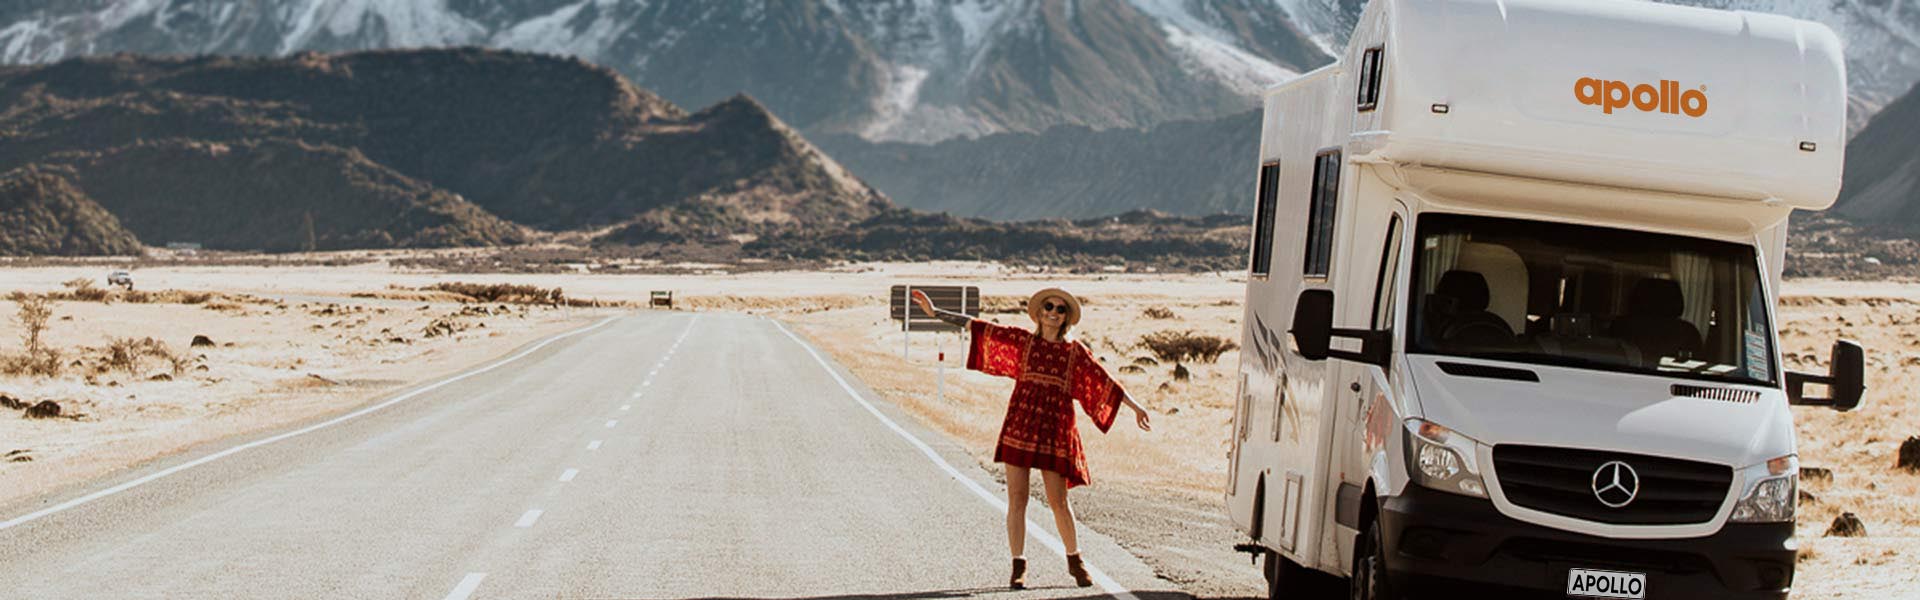 Woman standing in front of Apollo motorhome in New Zealand